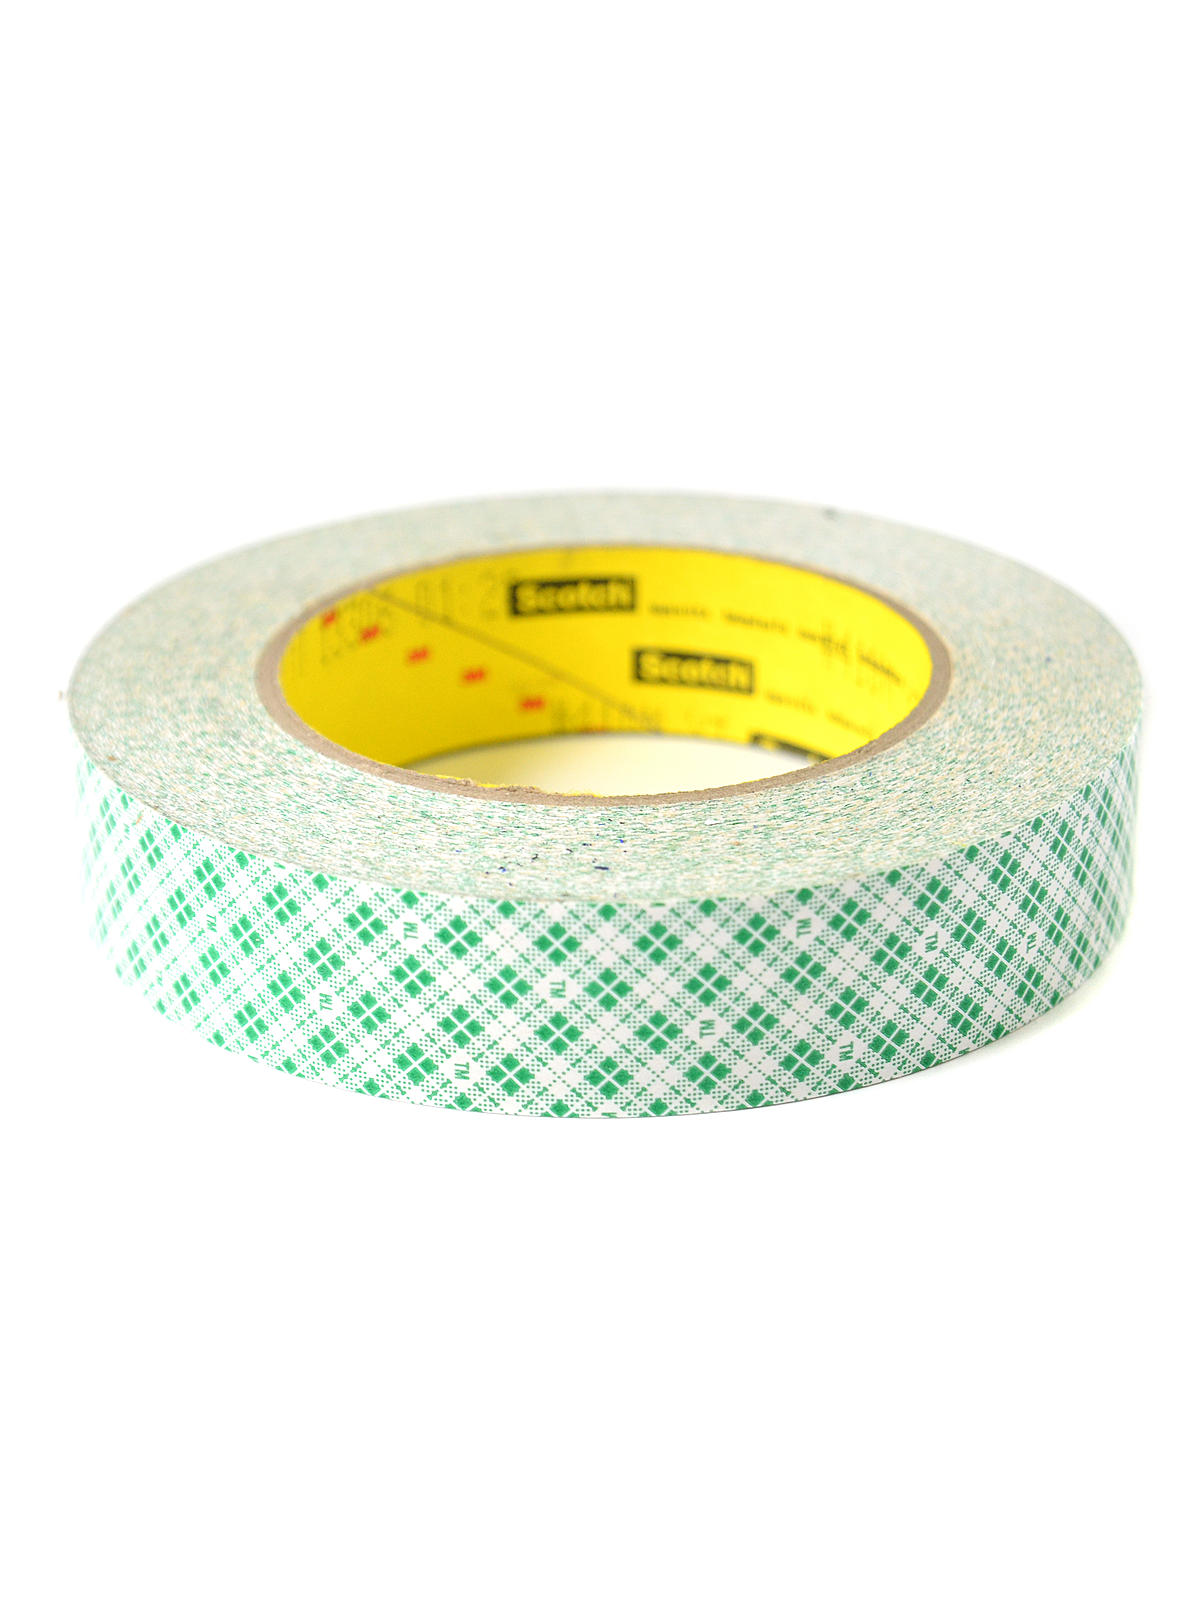 Double Coated Tissue Tape 1 In. X 36 Yd. 410B